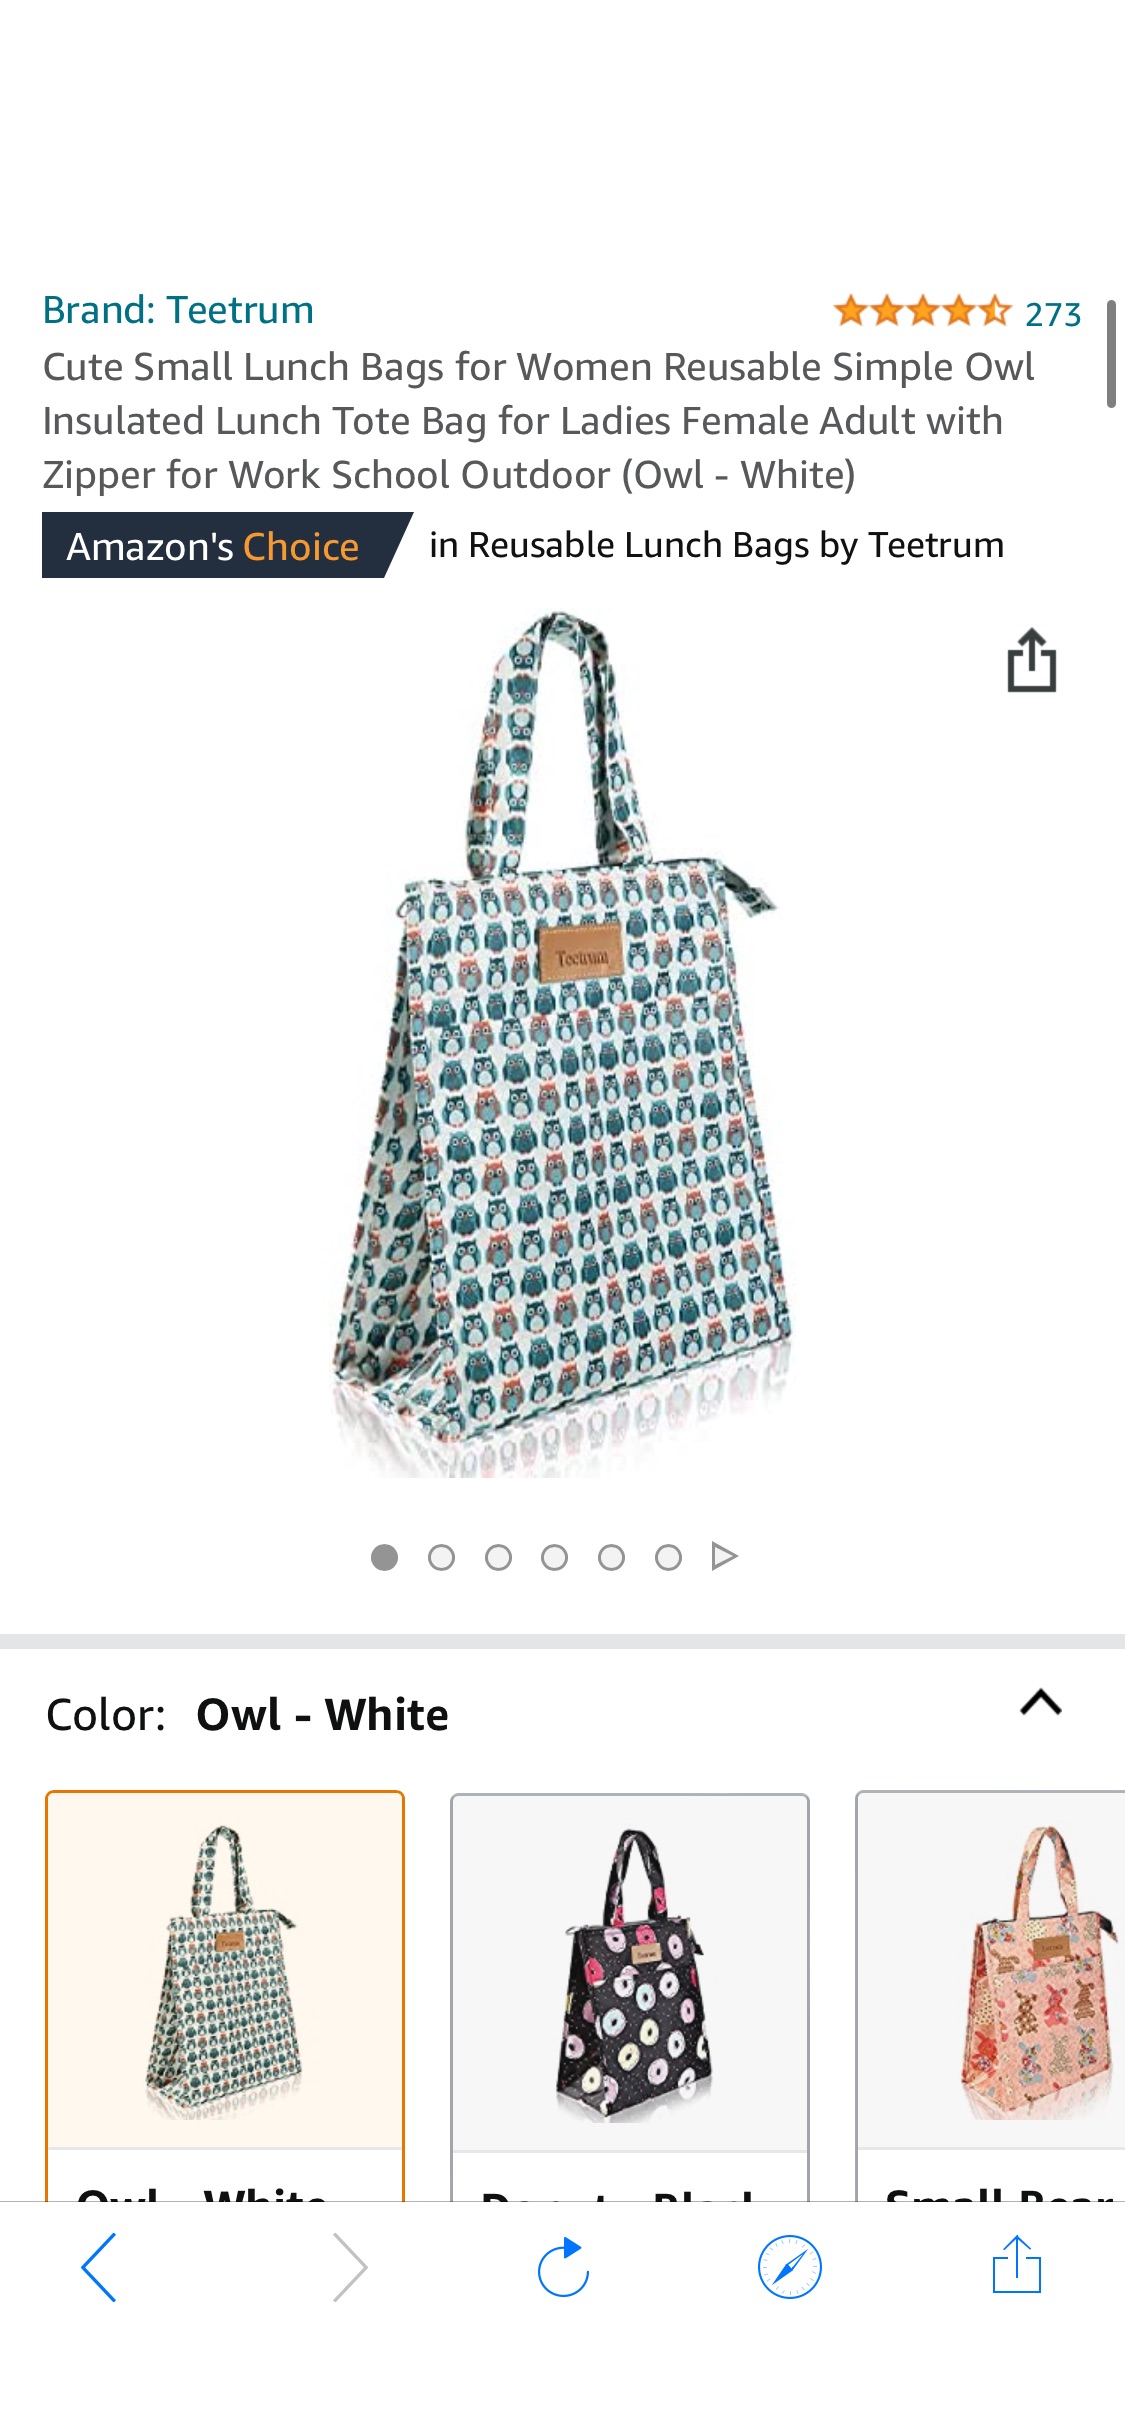 Amazon.com: Cute Small Lunch Bags for Women Reusable Simple Owl Insulated Lunch Tote Bag for Ladies Female Adult with Zipper for Work School Outdoor (Owl - White):午餐袋